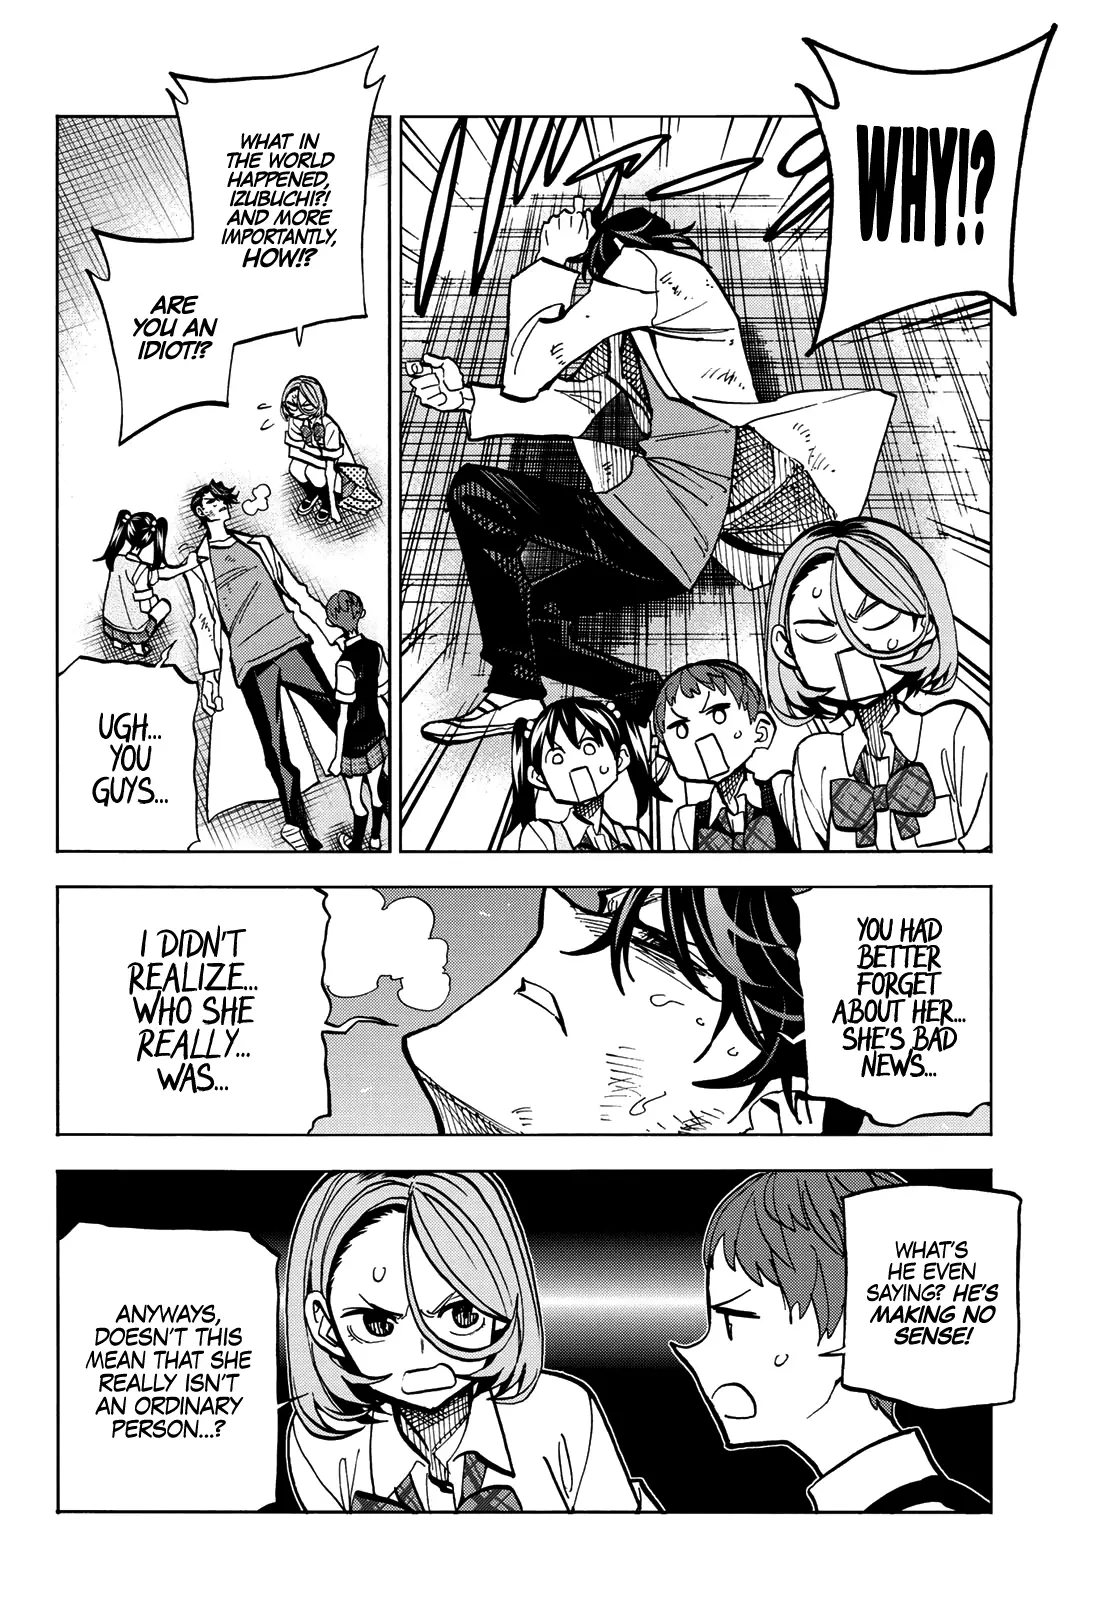 The Story Between A Dumb Prefect And A High School Girl With An Inappropriate Skirt Length - 7 page 14